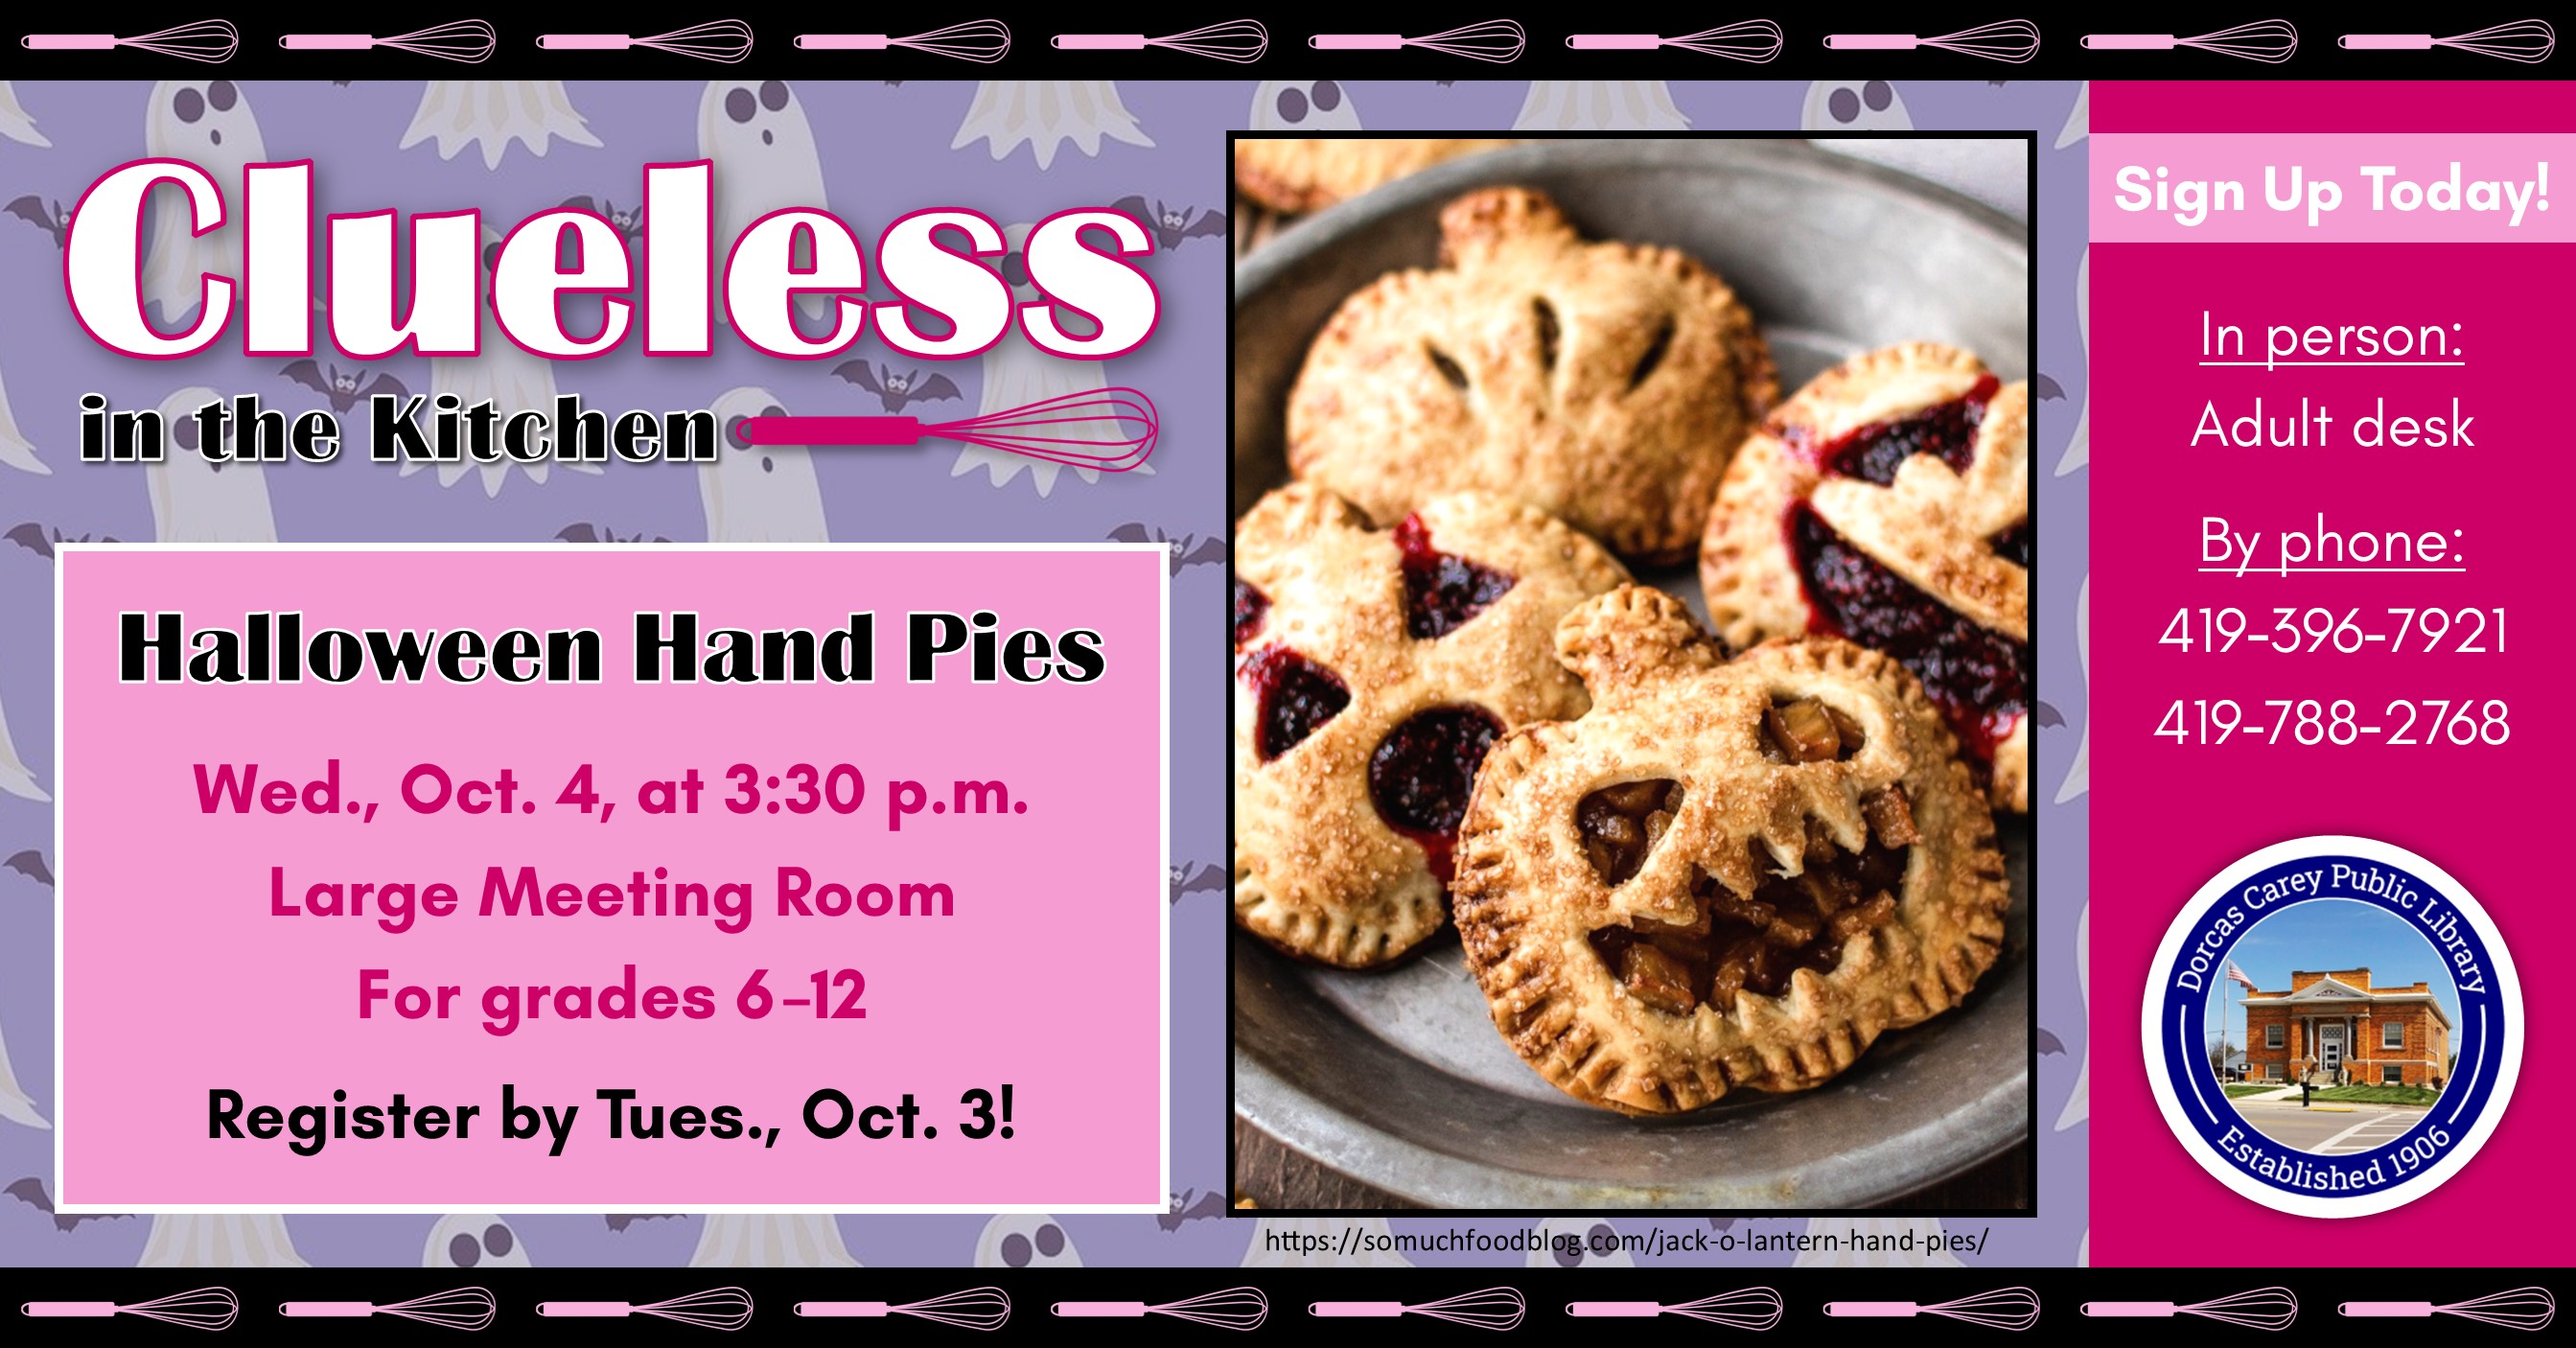 Come join in the cooking fun!  This program is for grades 6 through 12 and will take place the first Wednesday of the month September through May at 3:30 p.m.  This month’s project is:  Halloween Hand Pies.  Please sign up at the adult circulation desk or by phone at 419-396-7921 or 419-788-2768.